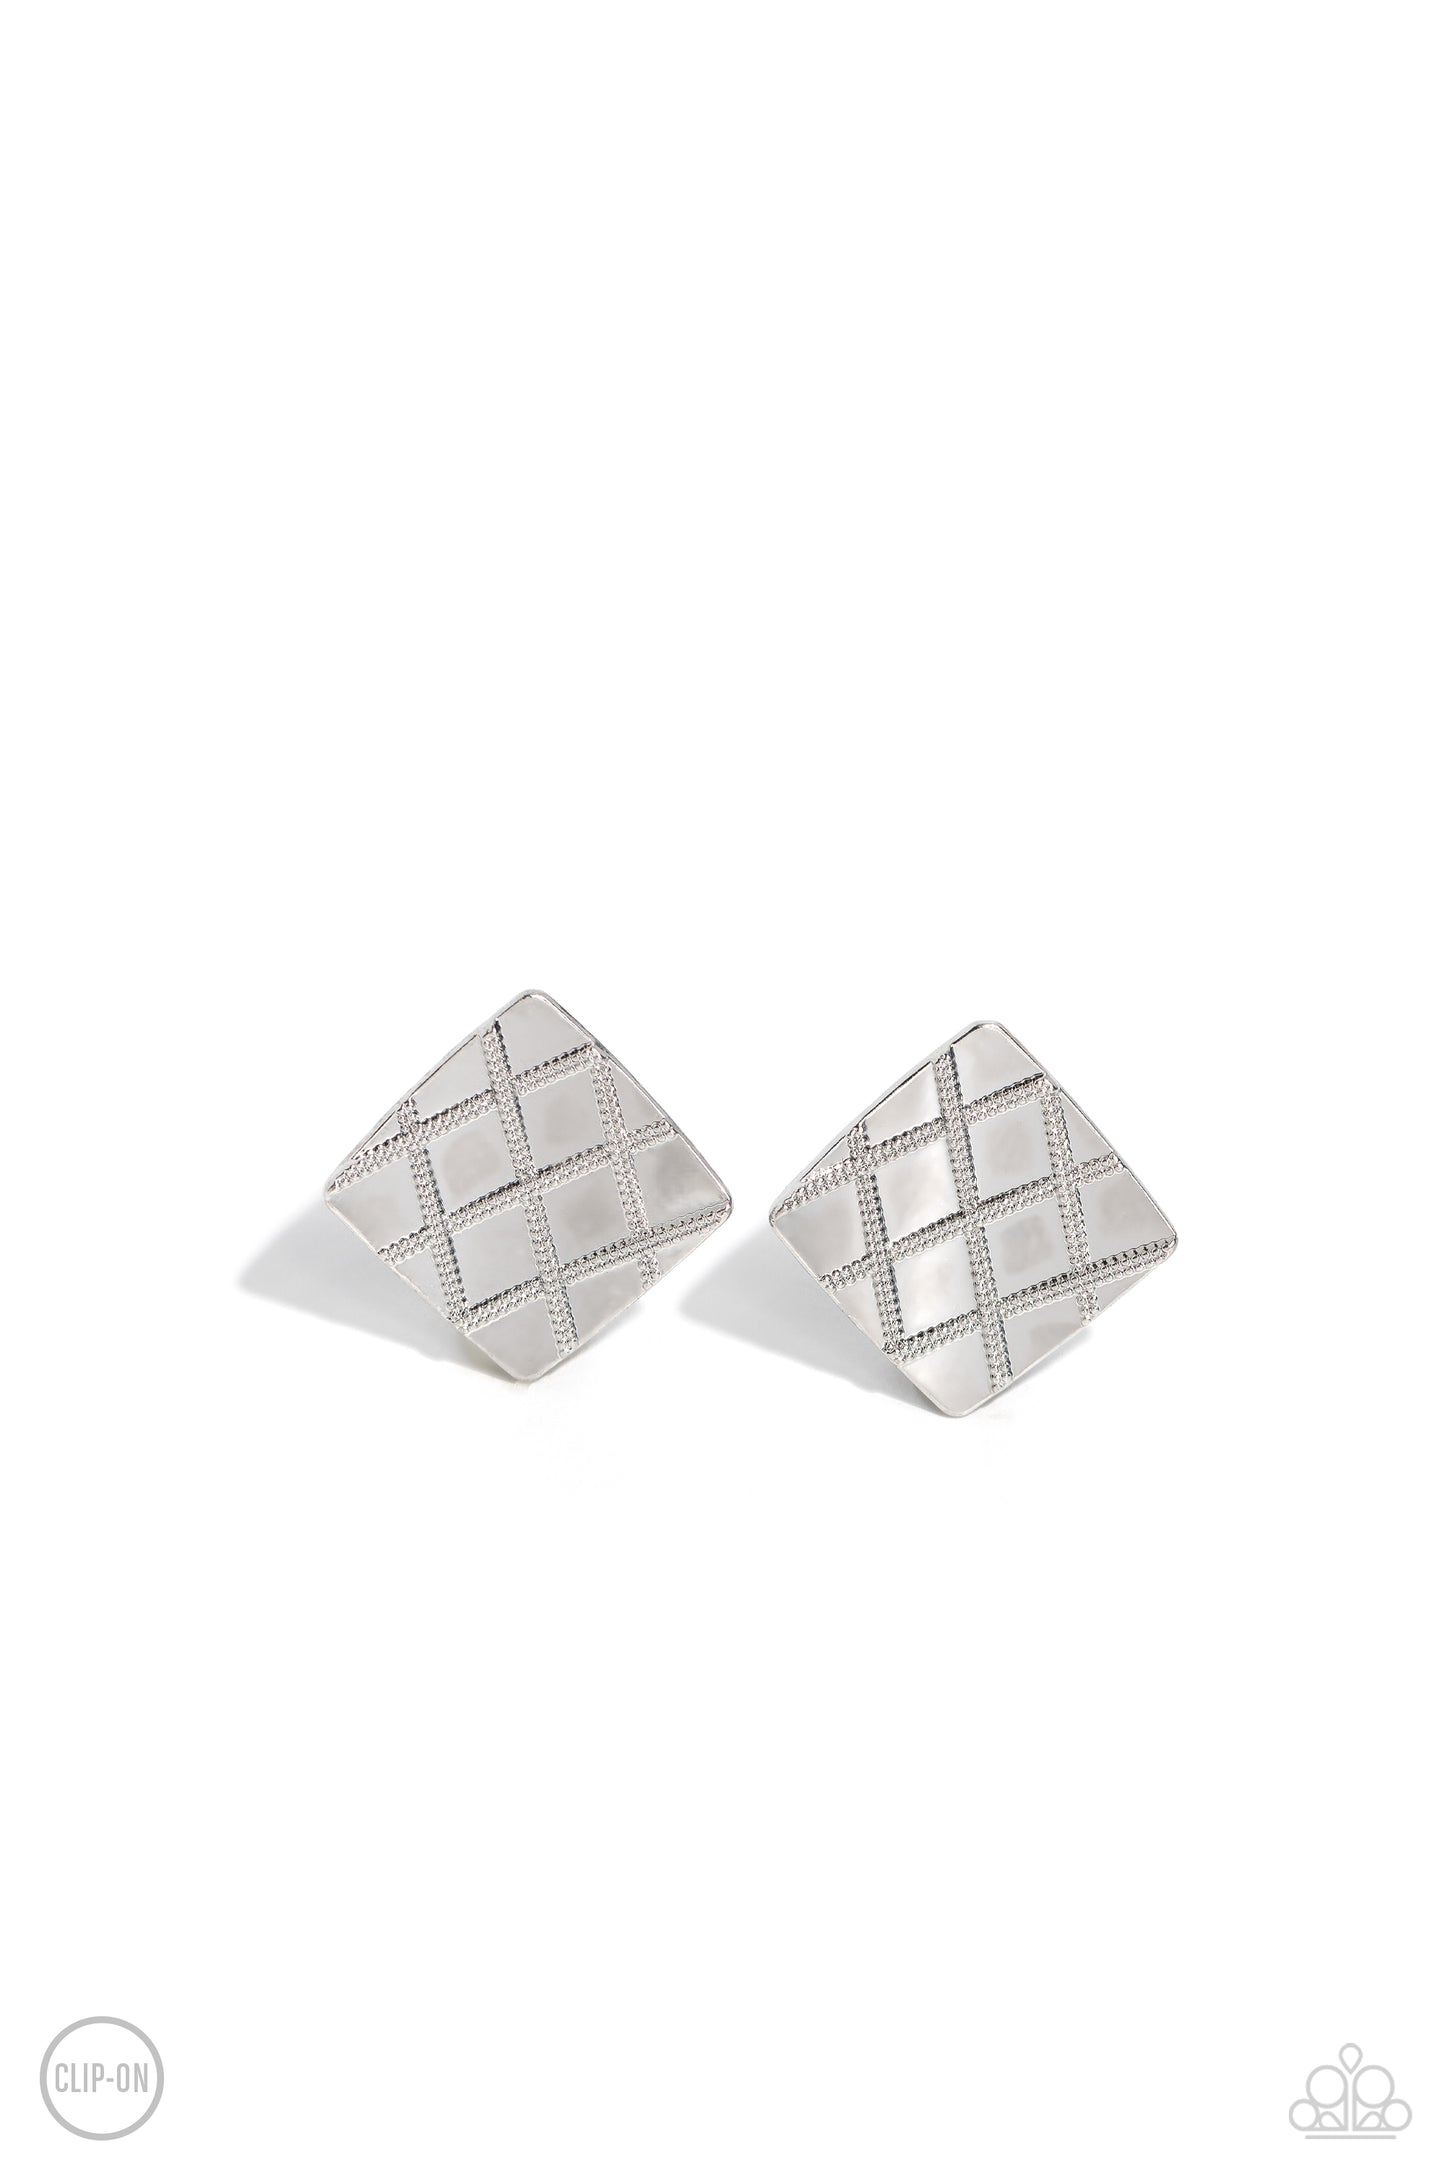 PLAID and Simple - Silver Earrings